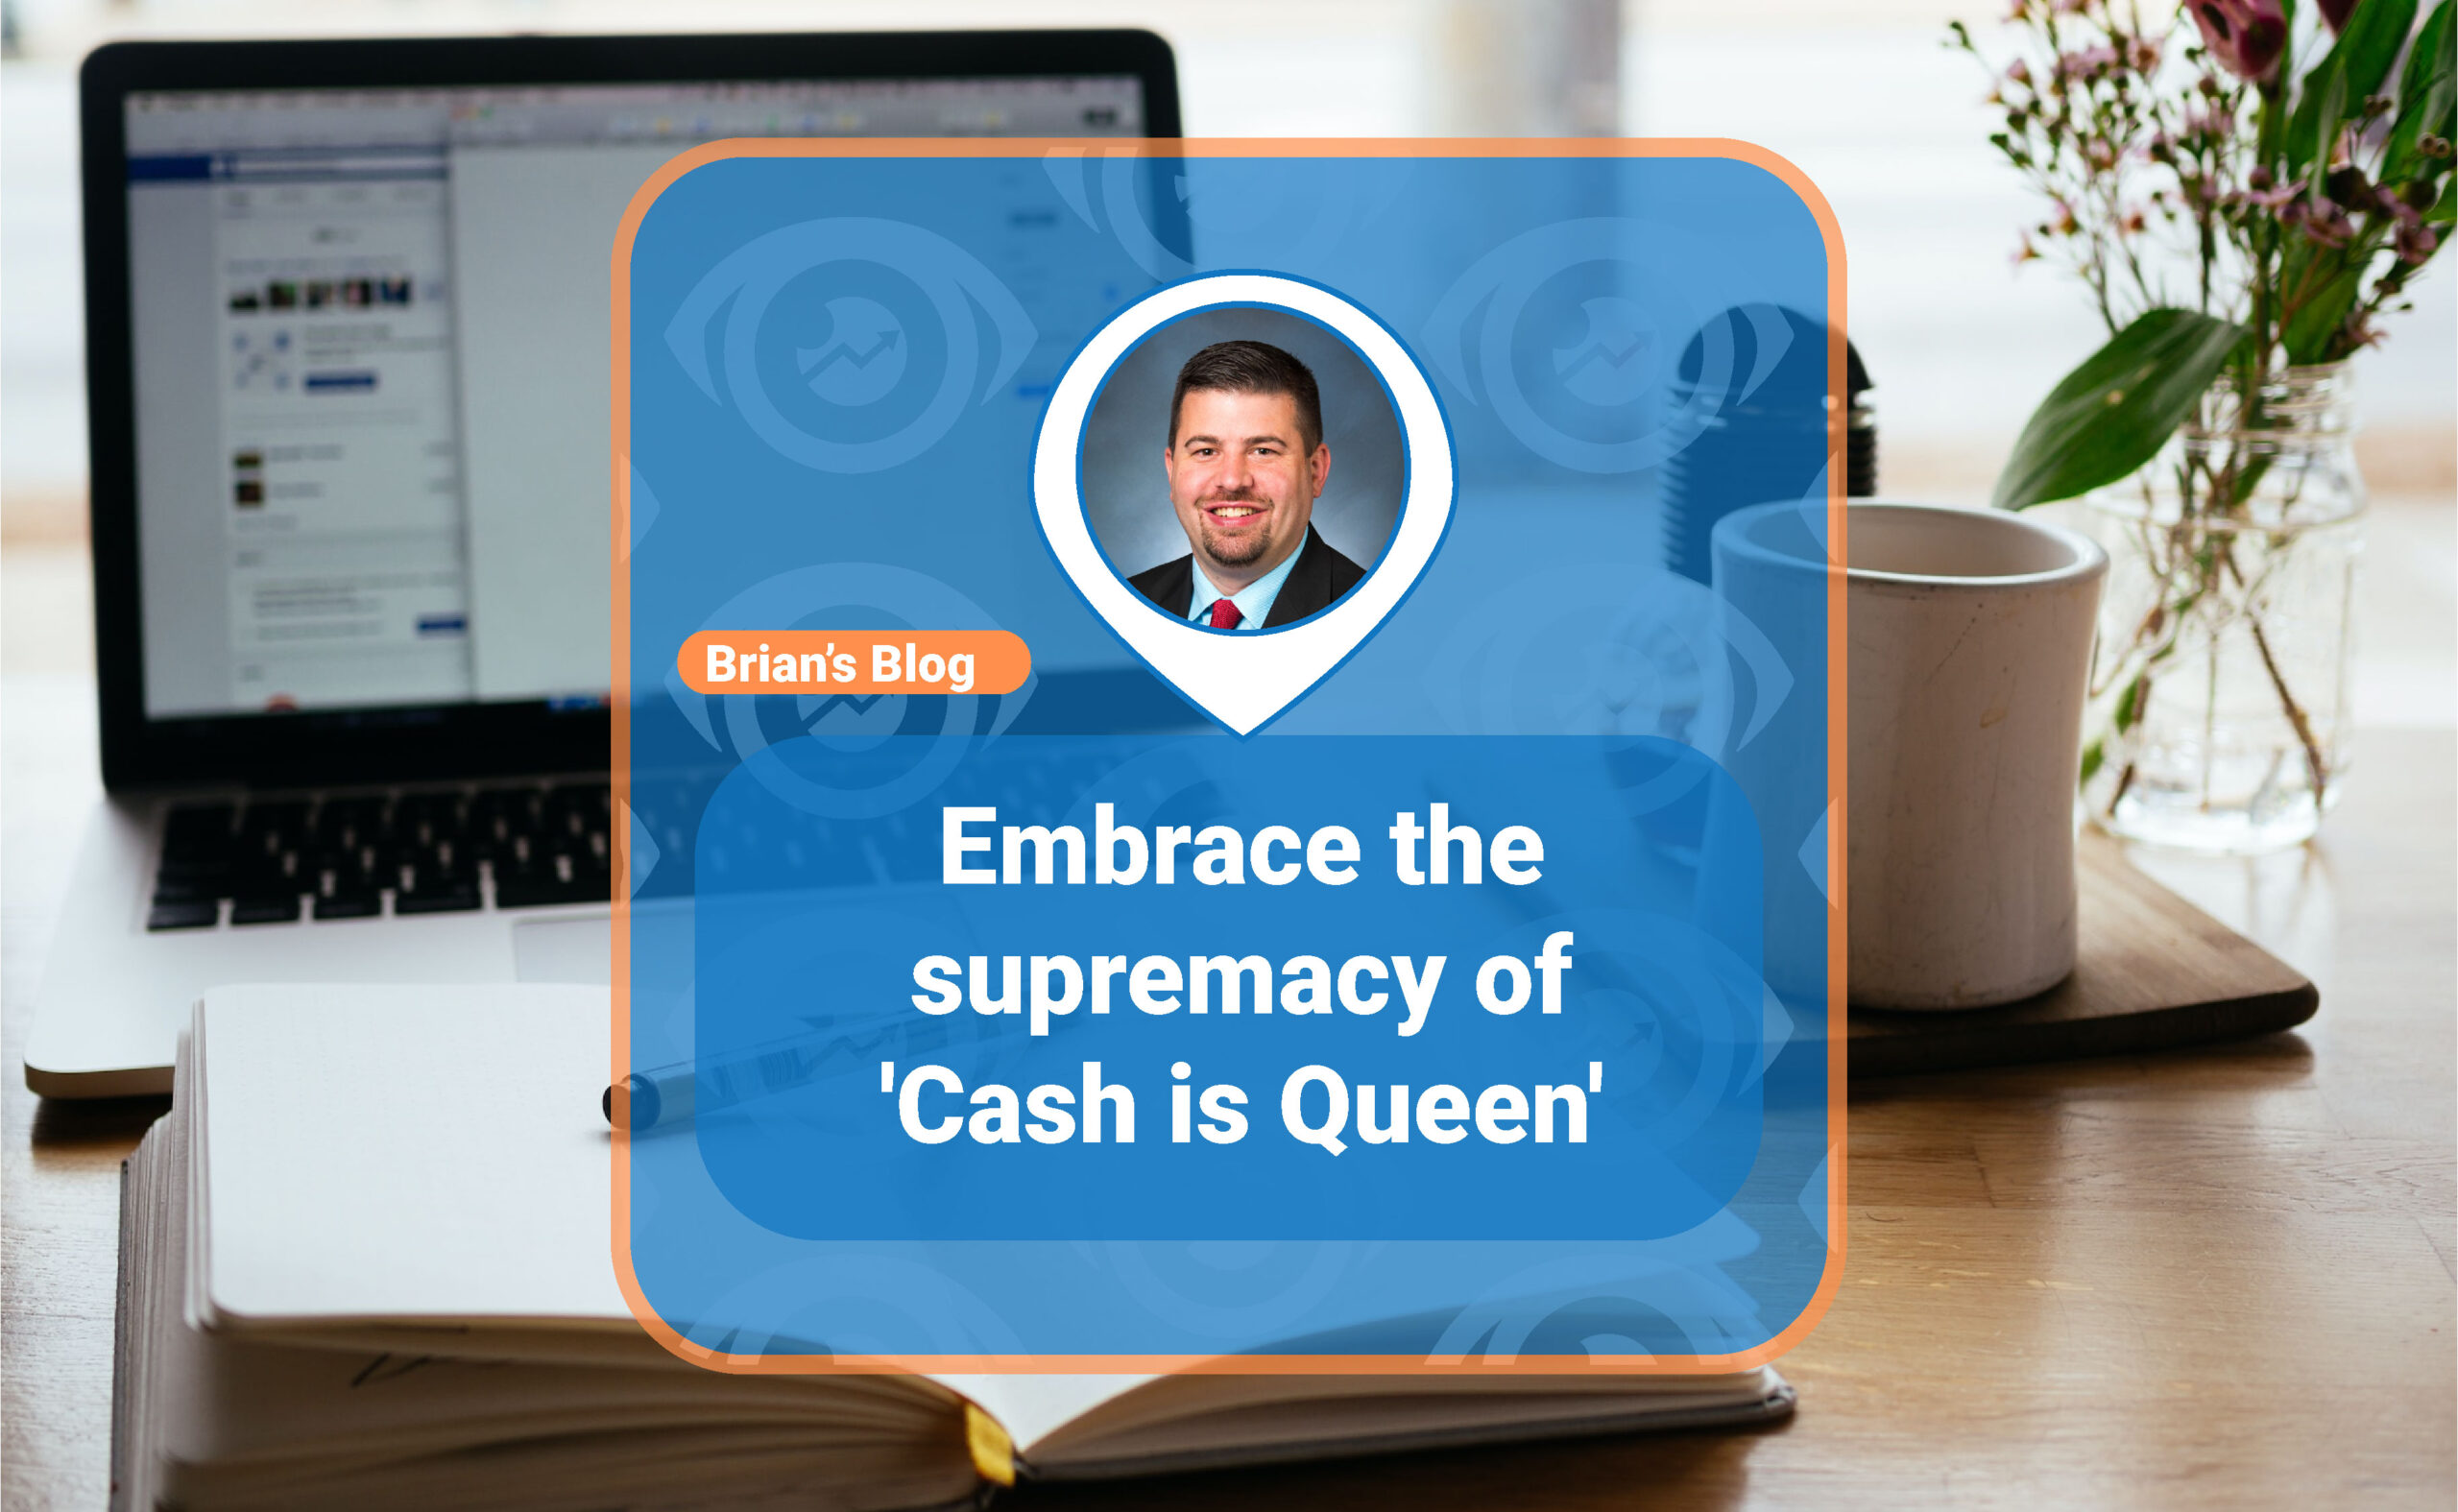 Embrace the supremacy of ‘Cash is Queen’.